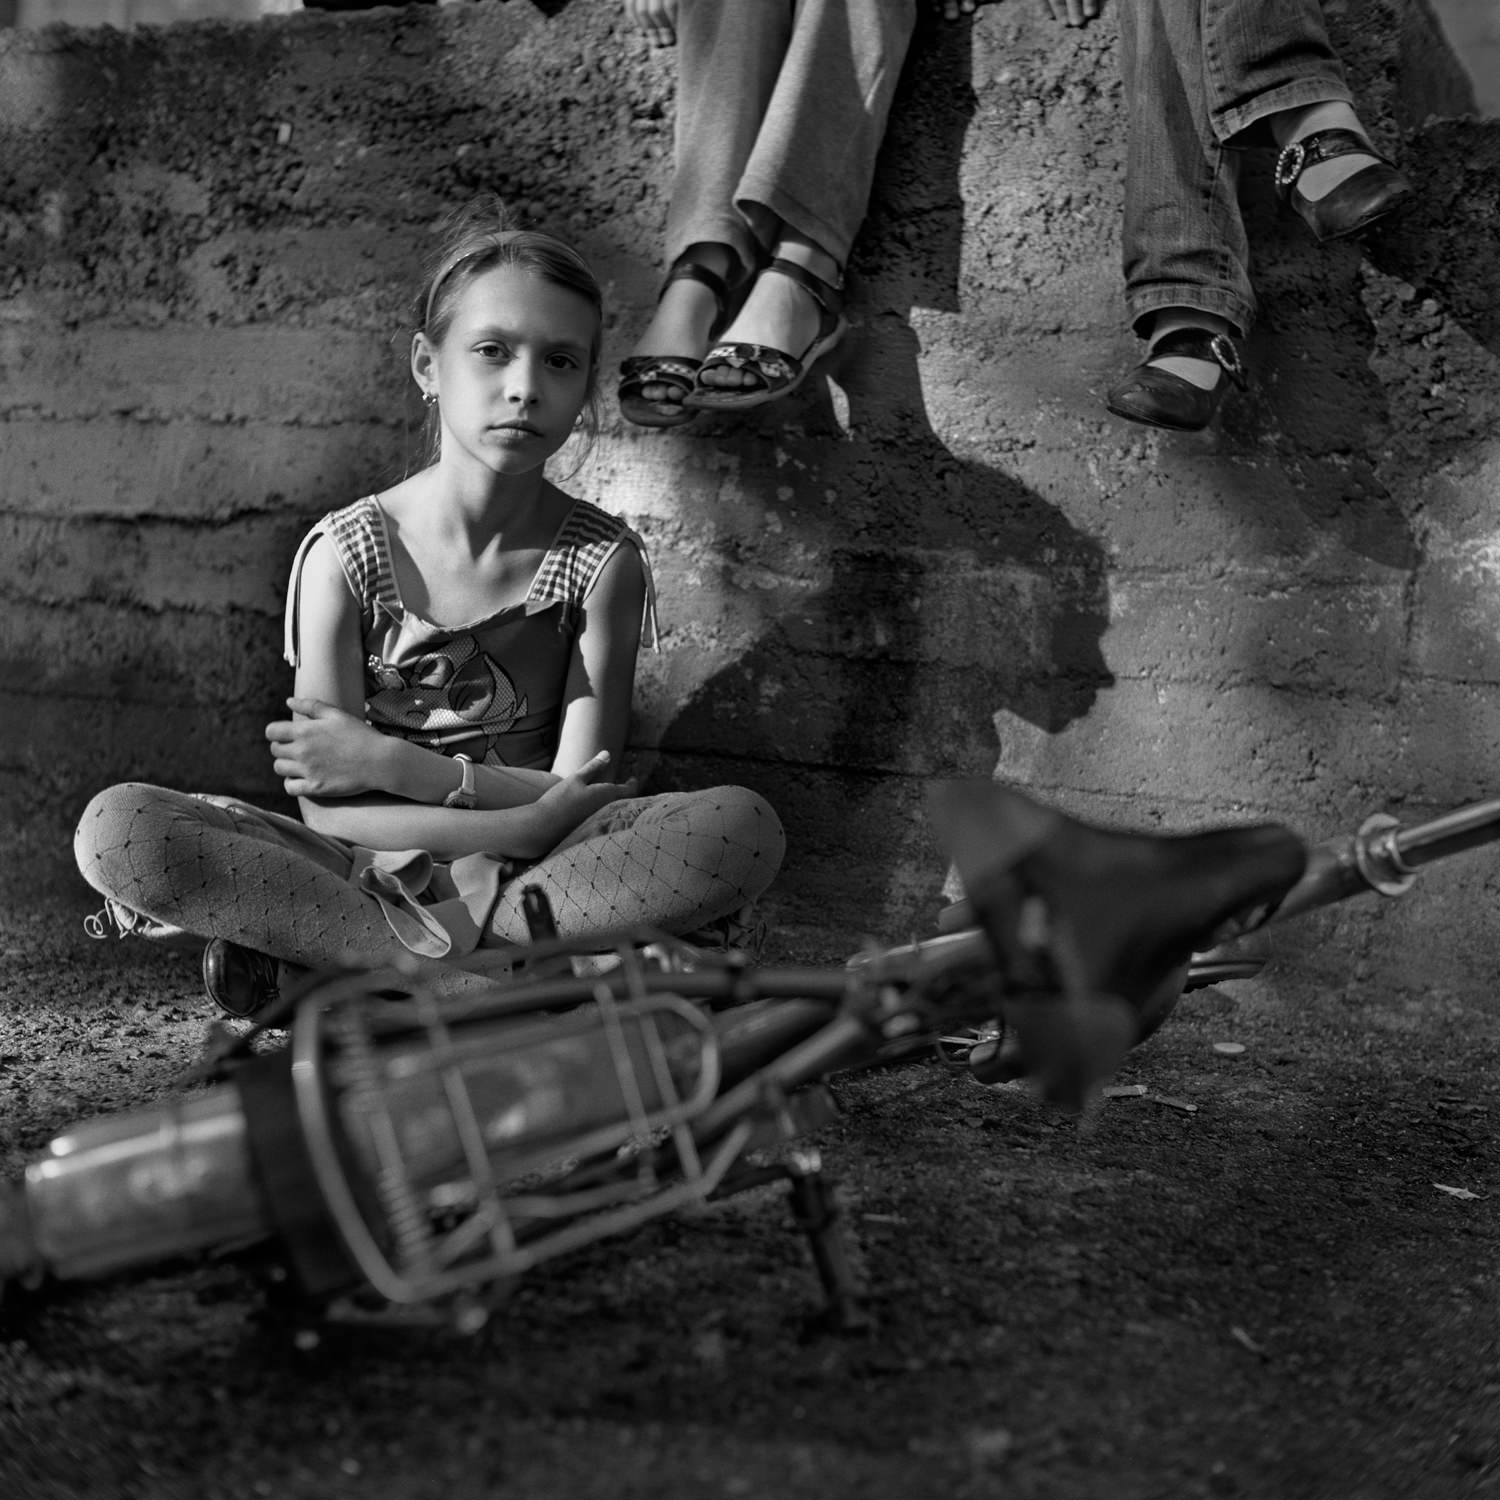 Black-and-white street portrait of girl sitting behind old bycicle with friends taken on medium format film camera Yashica Mat G124